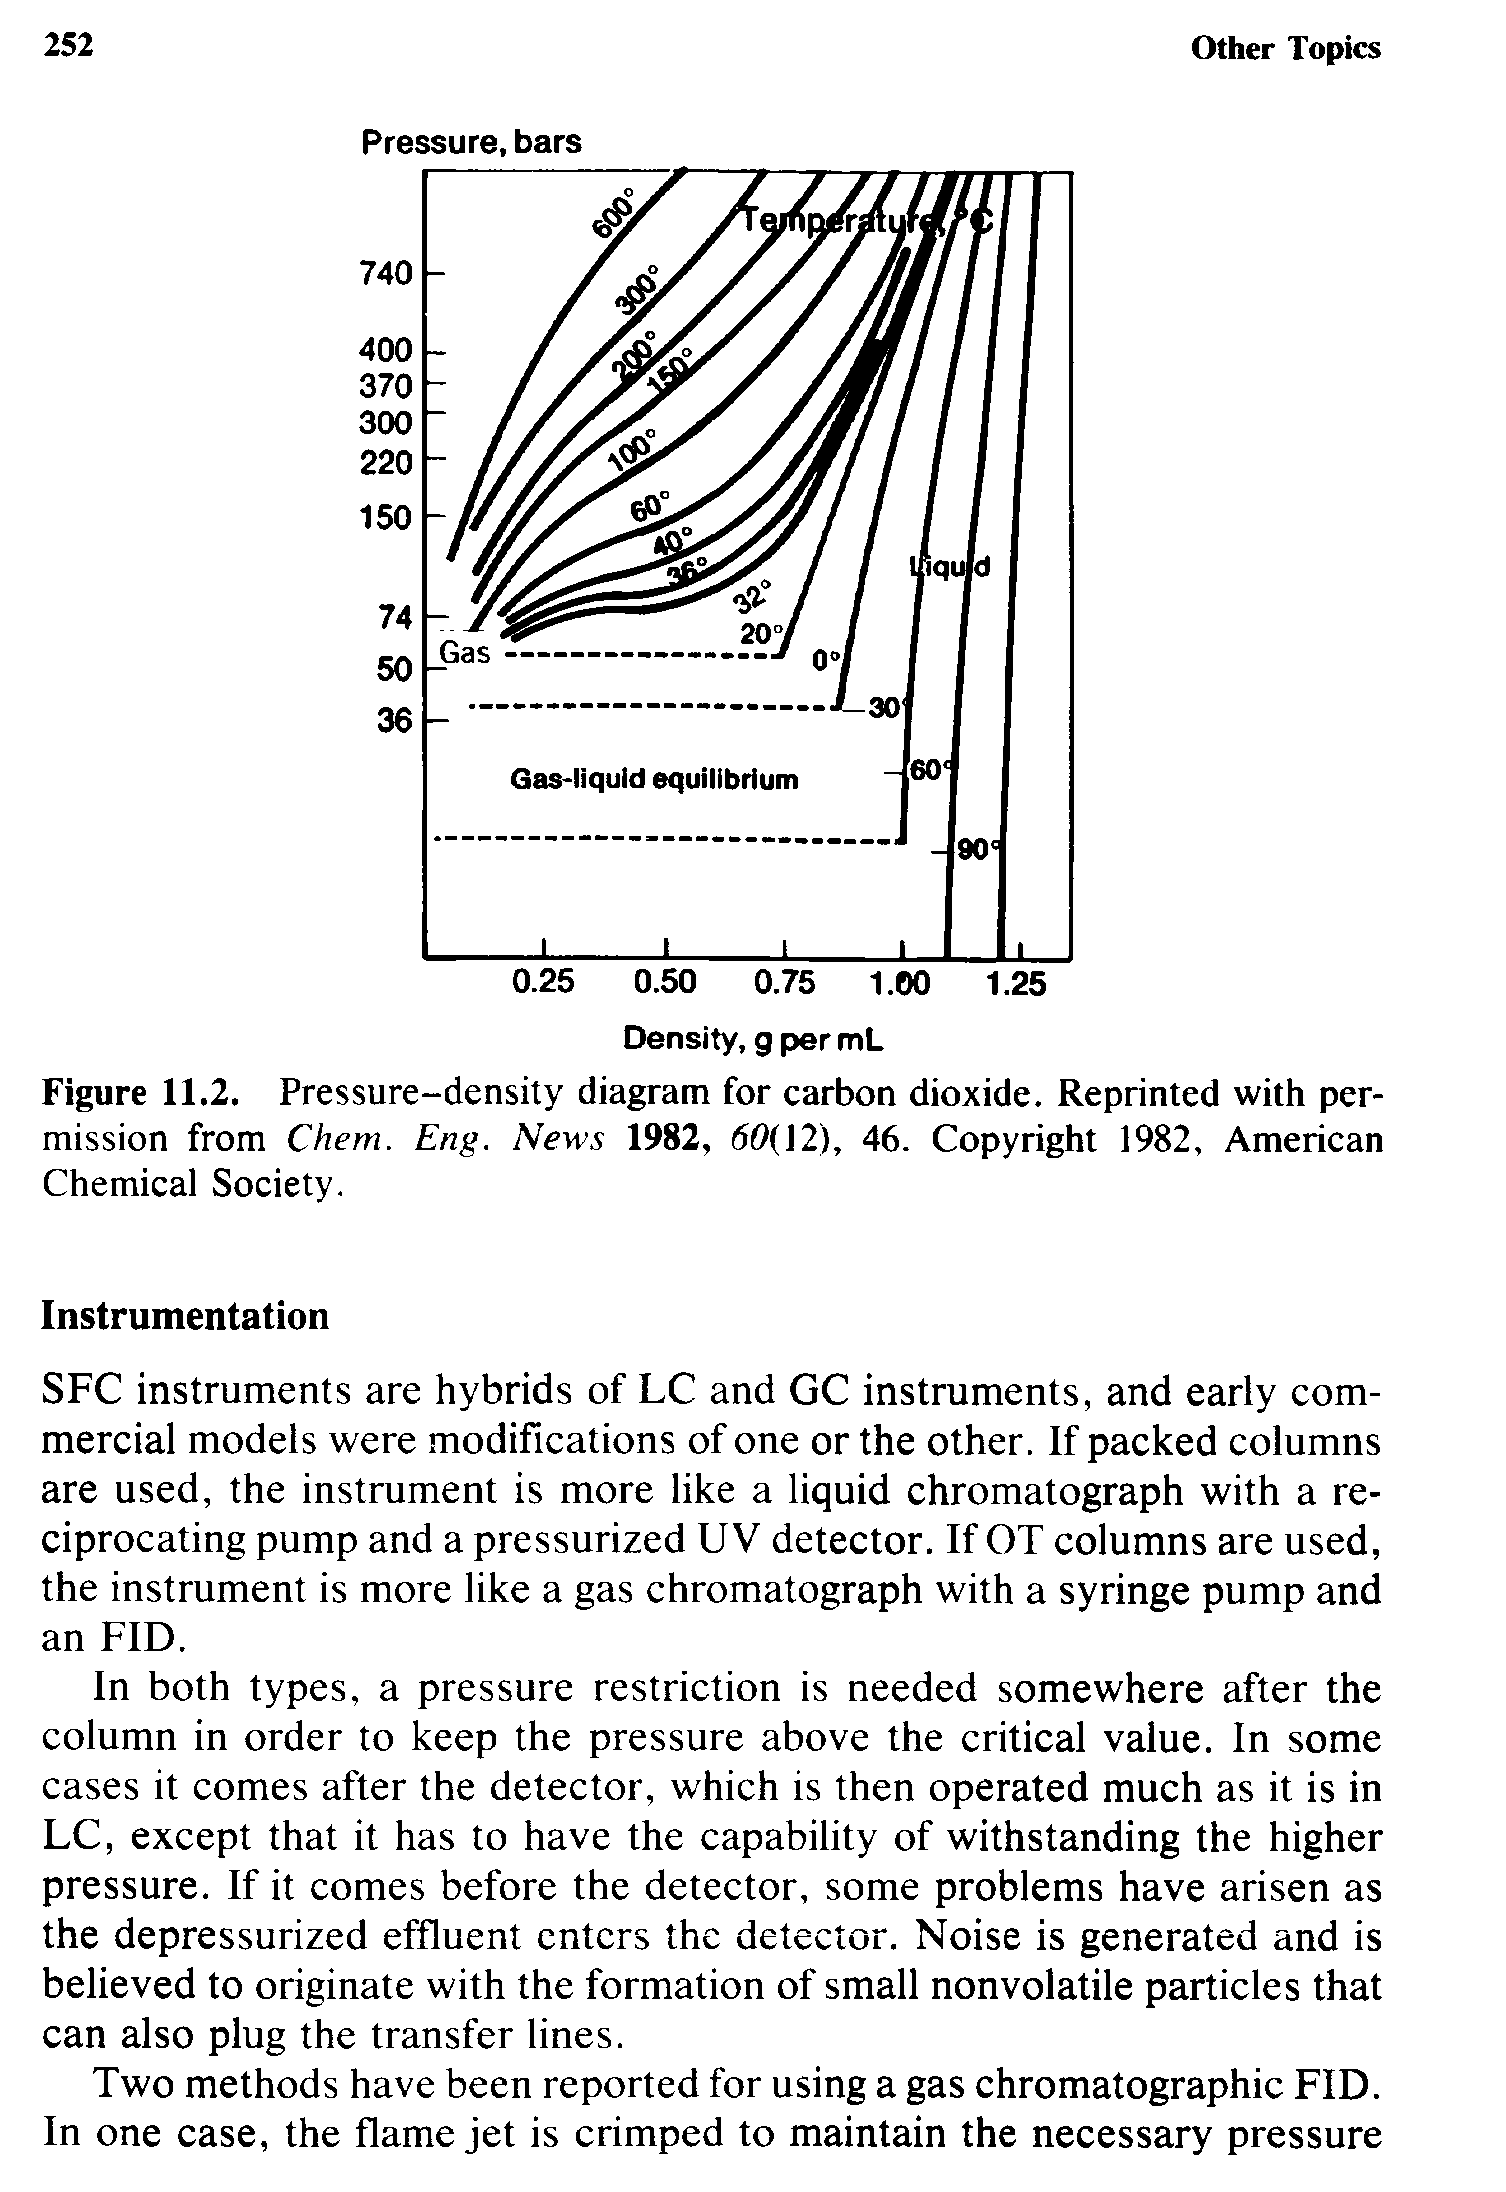 Figure 11.2. Pressure-density diagram for carbon dioxide. Reprinted with permission from Chem. Eng. News 1982, 60(12), 46. Copyright 1982, American Chemical Society.